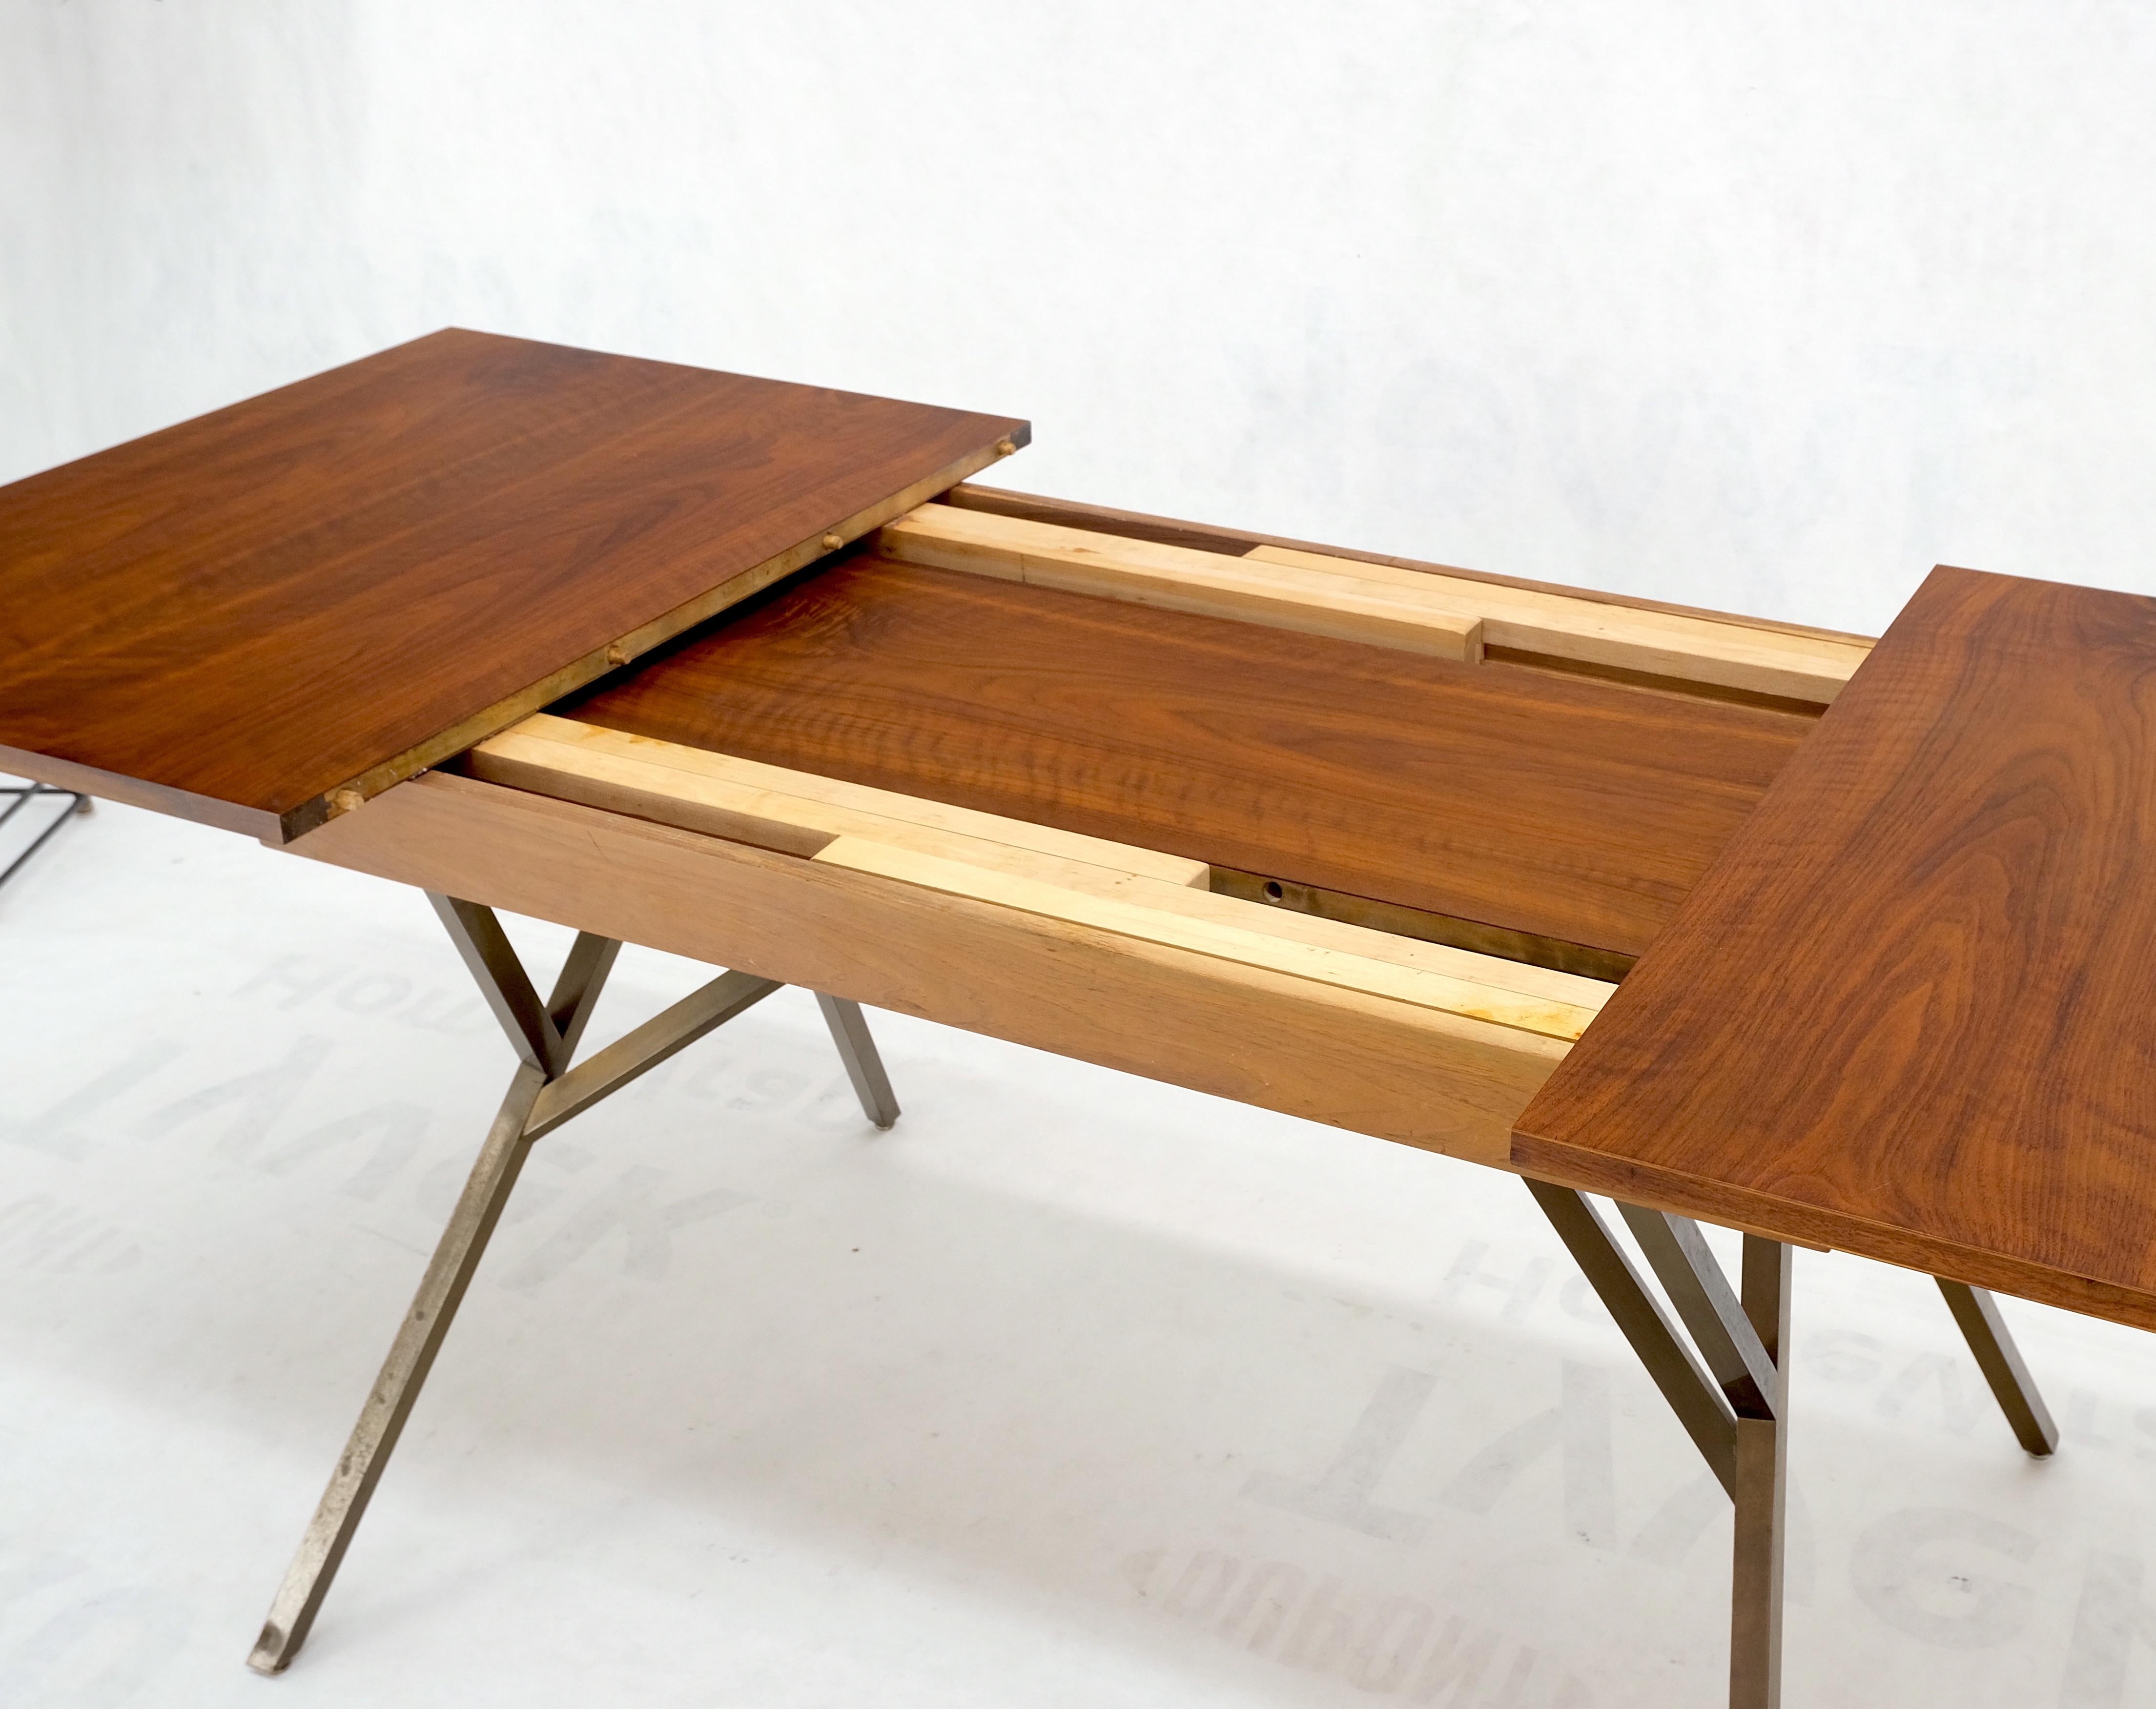 Mid-Century Modern solid bronze square profile two extension boards walnut top dining table mint!
Very unusual vintage circa 1970s table. Possibly custom design very much in style of George Nelson.
Two self storing leaves, twenty inch leaves for a